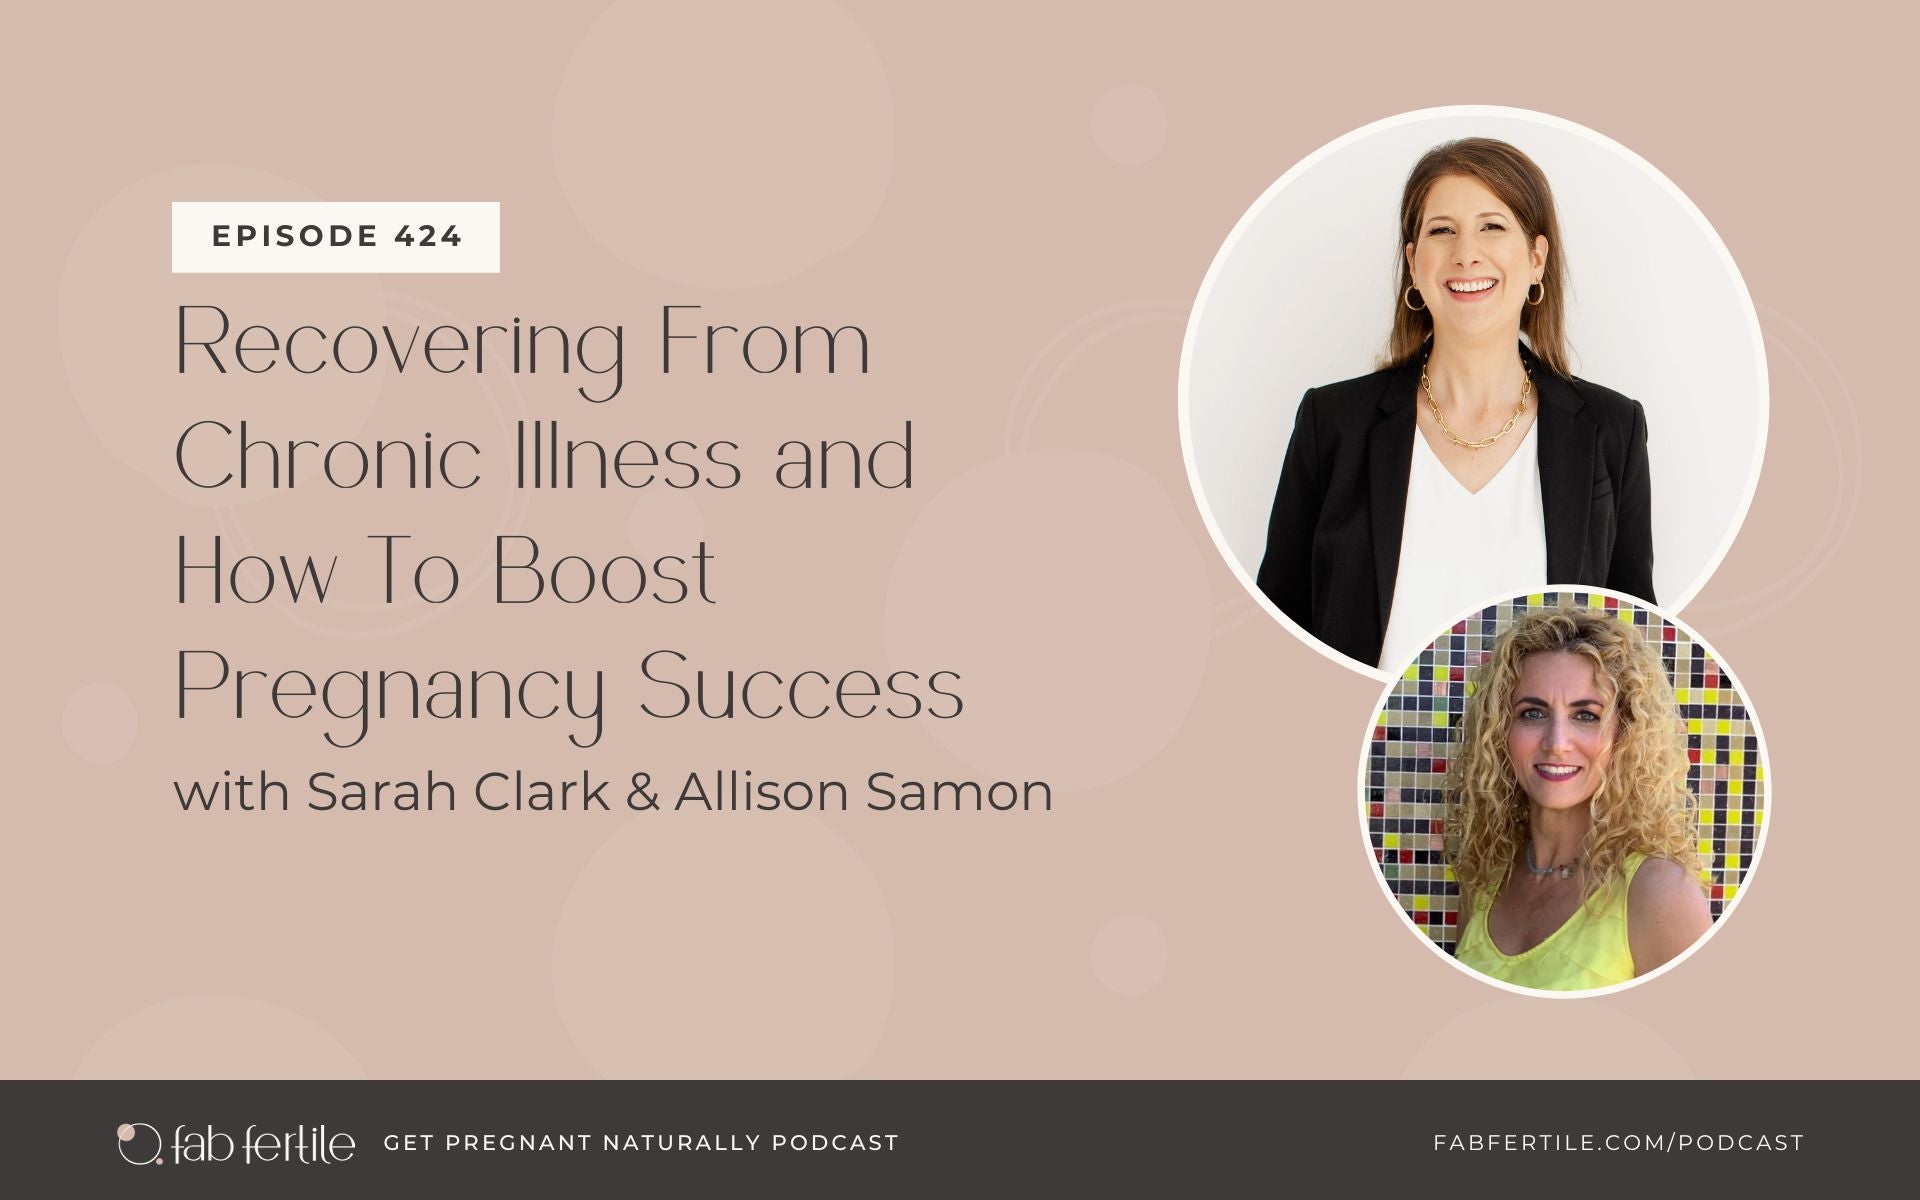 Recovering From Chronic Illness and How To Boost Pregnancy Success with Allison Samon